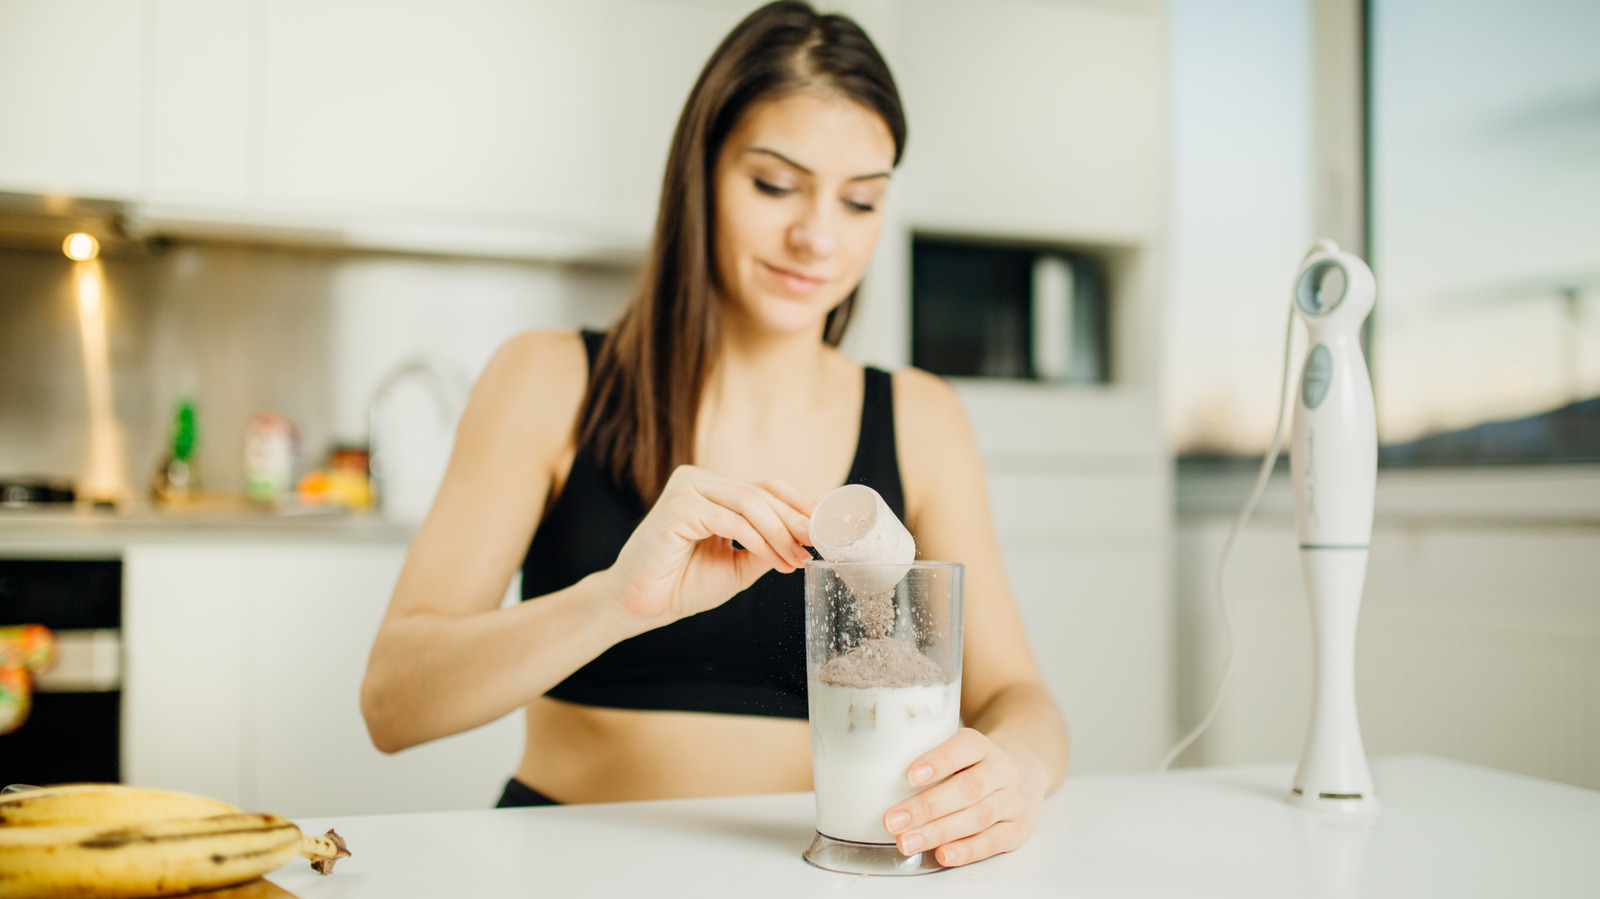 Protein Shakes for Weight Loss: Is a Protein Shake Diet Safe?